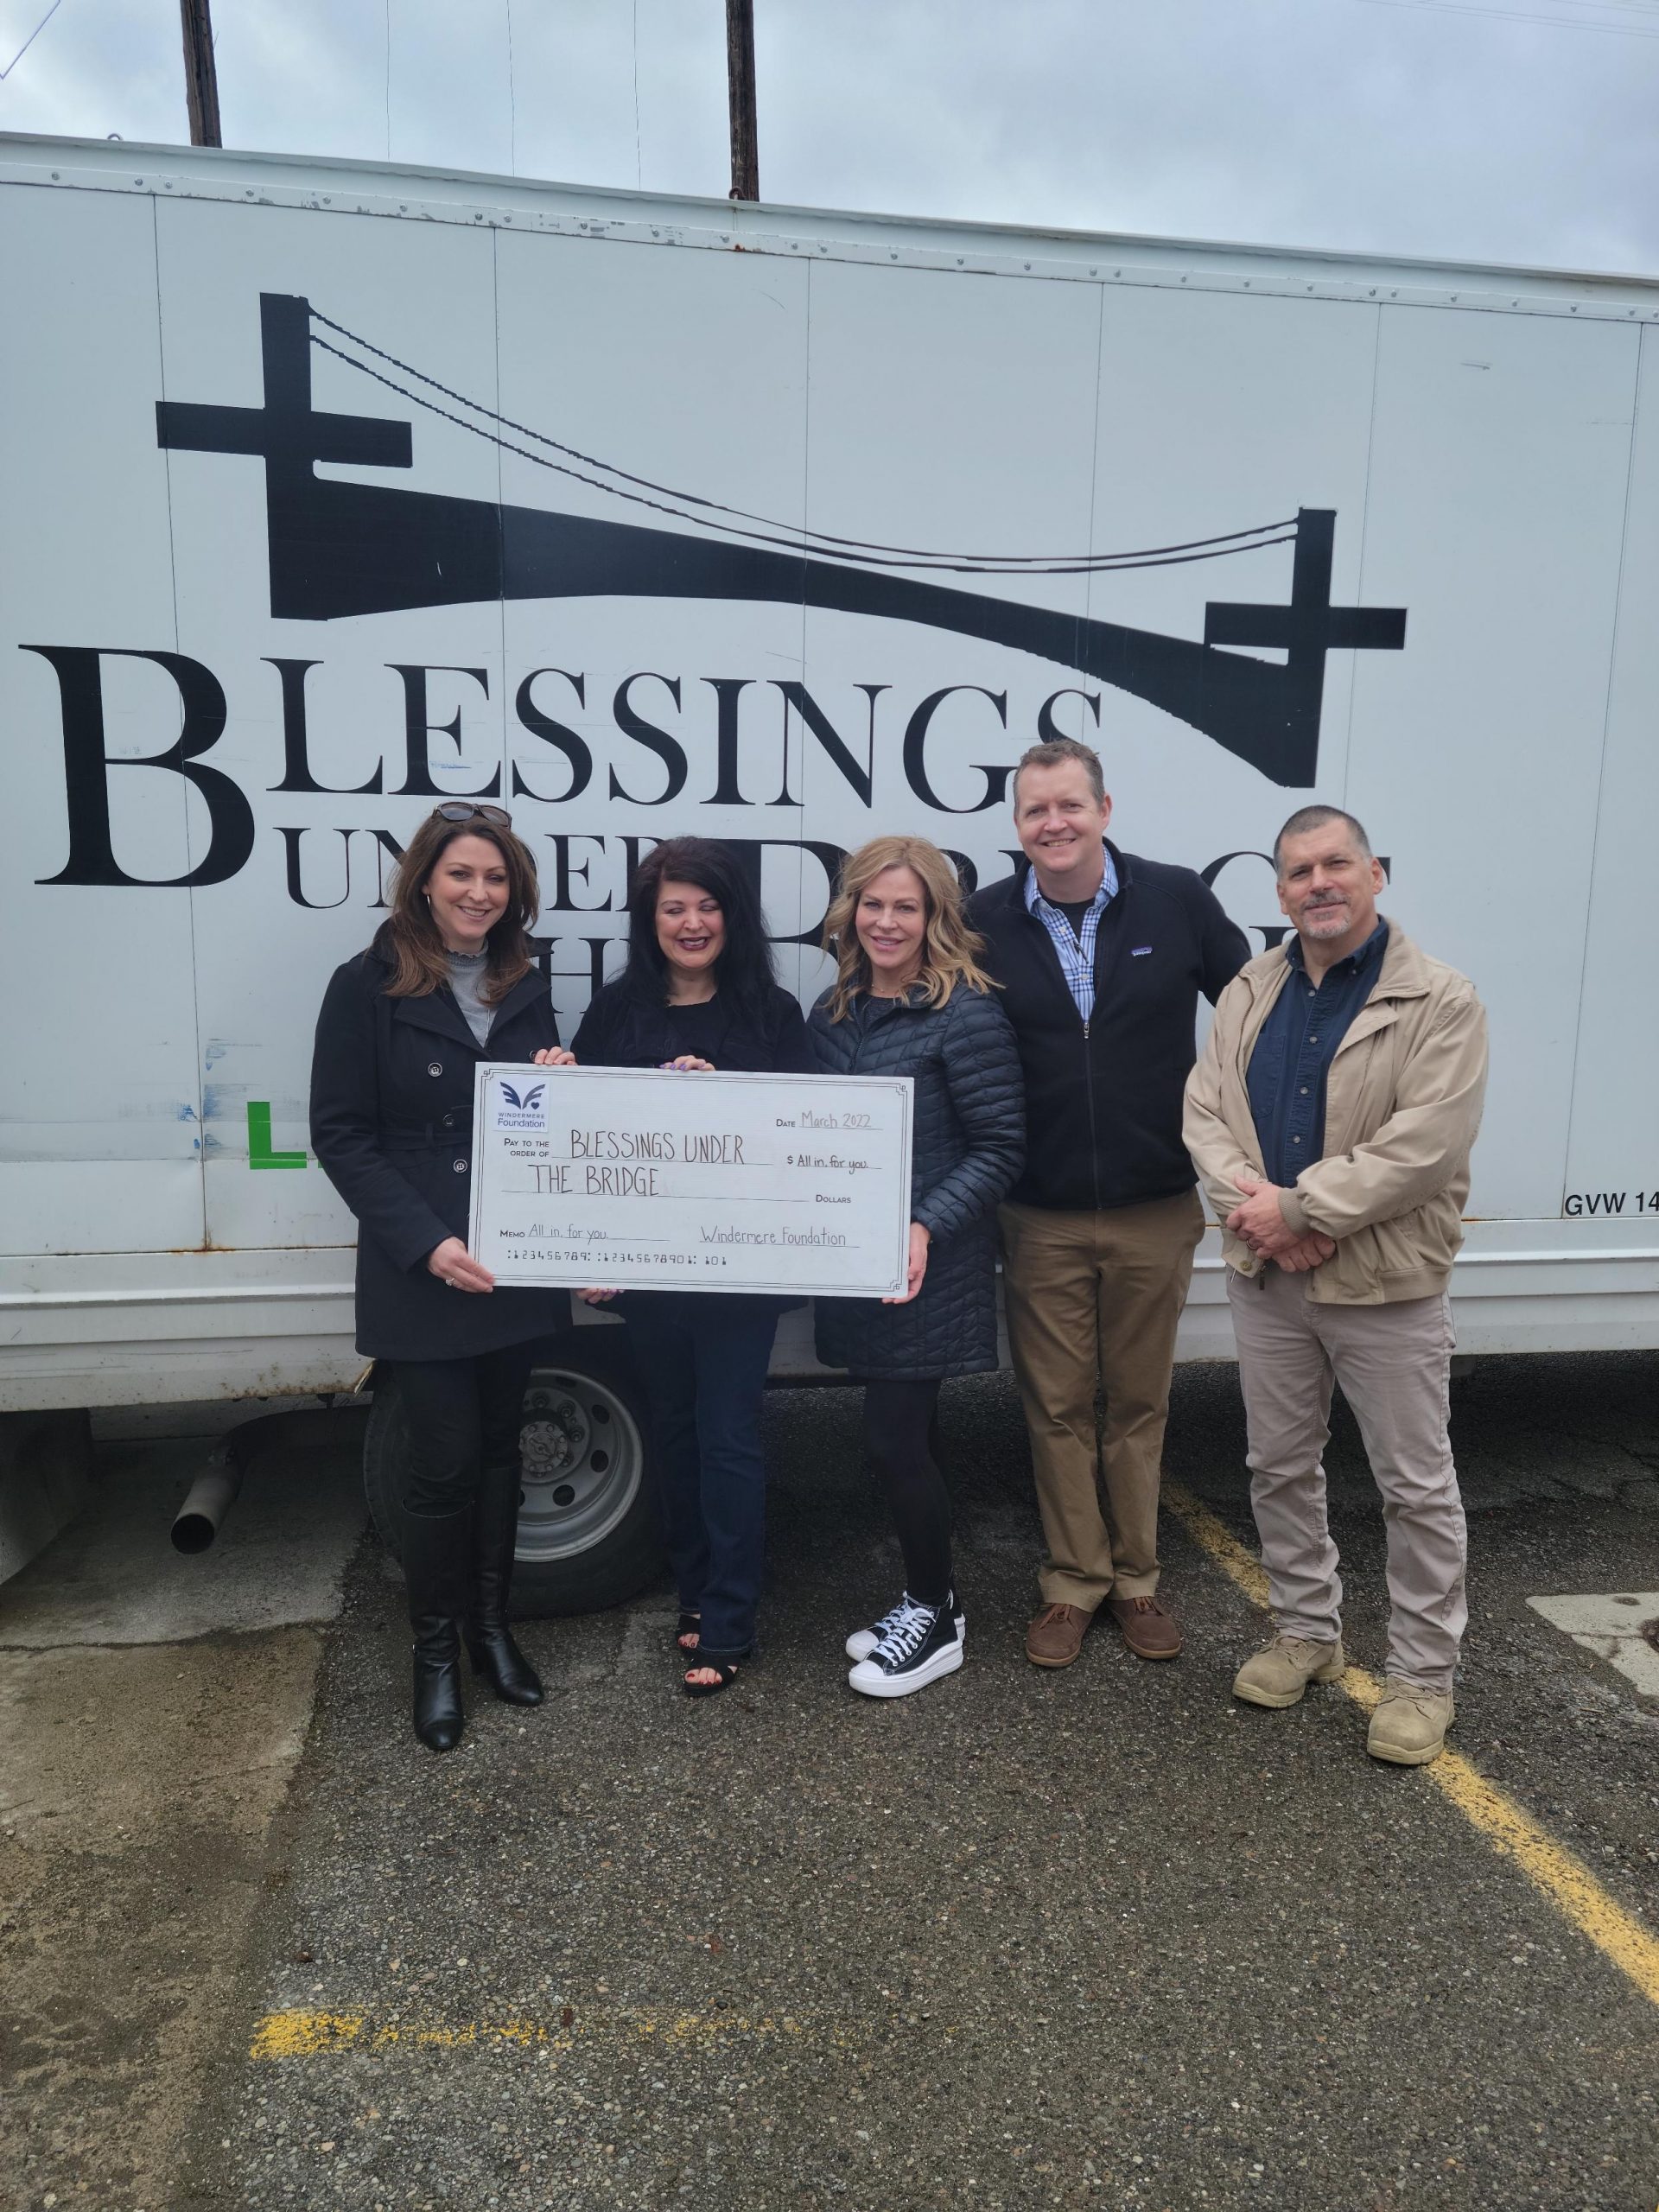 Blessings-Under-the-Bridge- organization with lifesize donation check